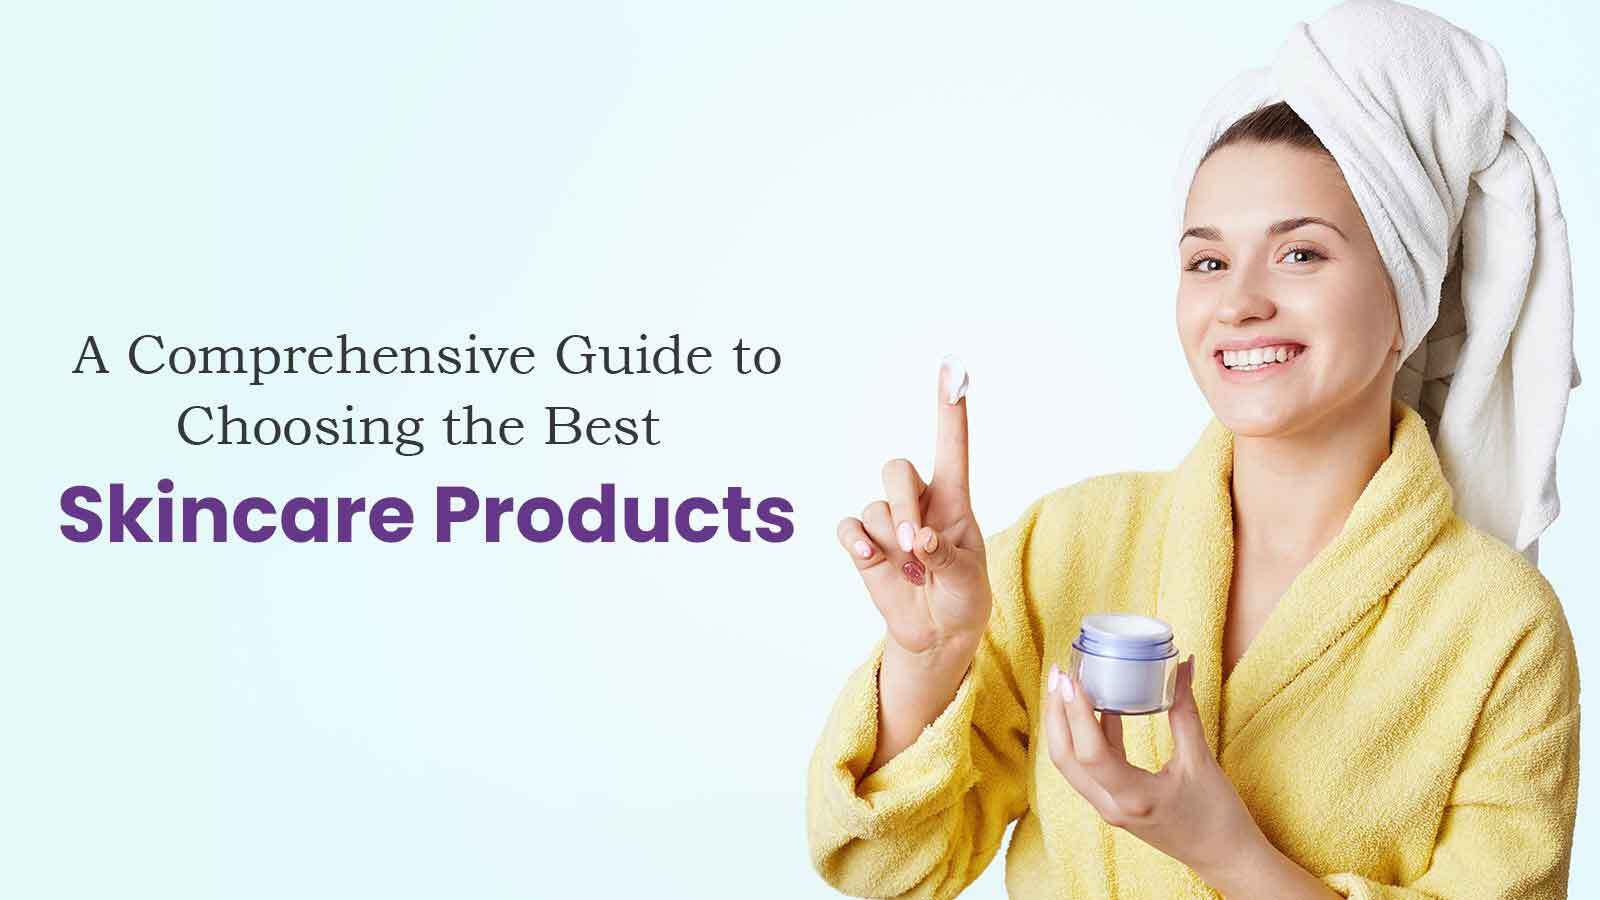 A Comprehensive Guide to Choosing the Best Skincare Products!